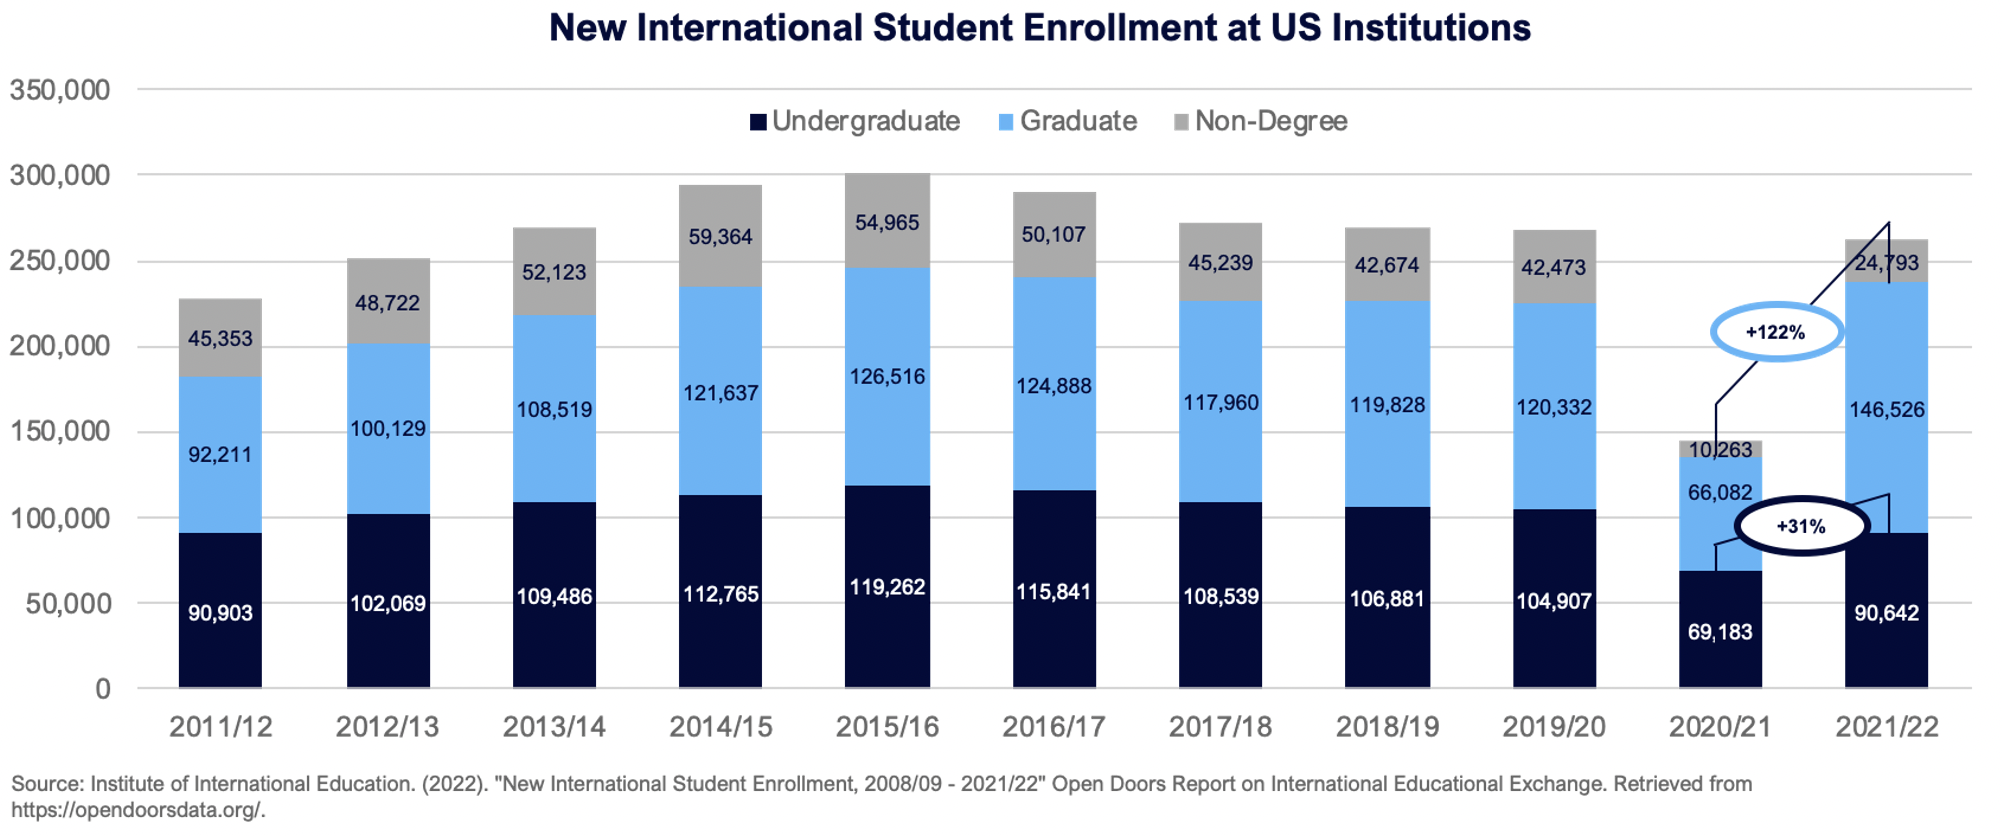 New international student enrollment at US institutions 